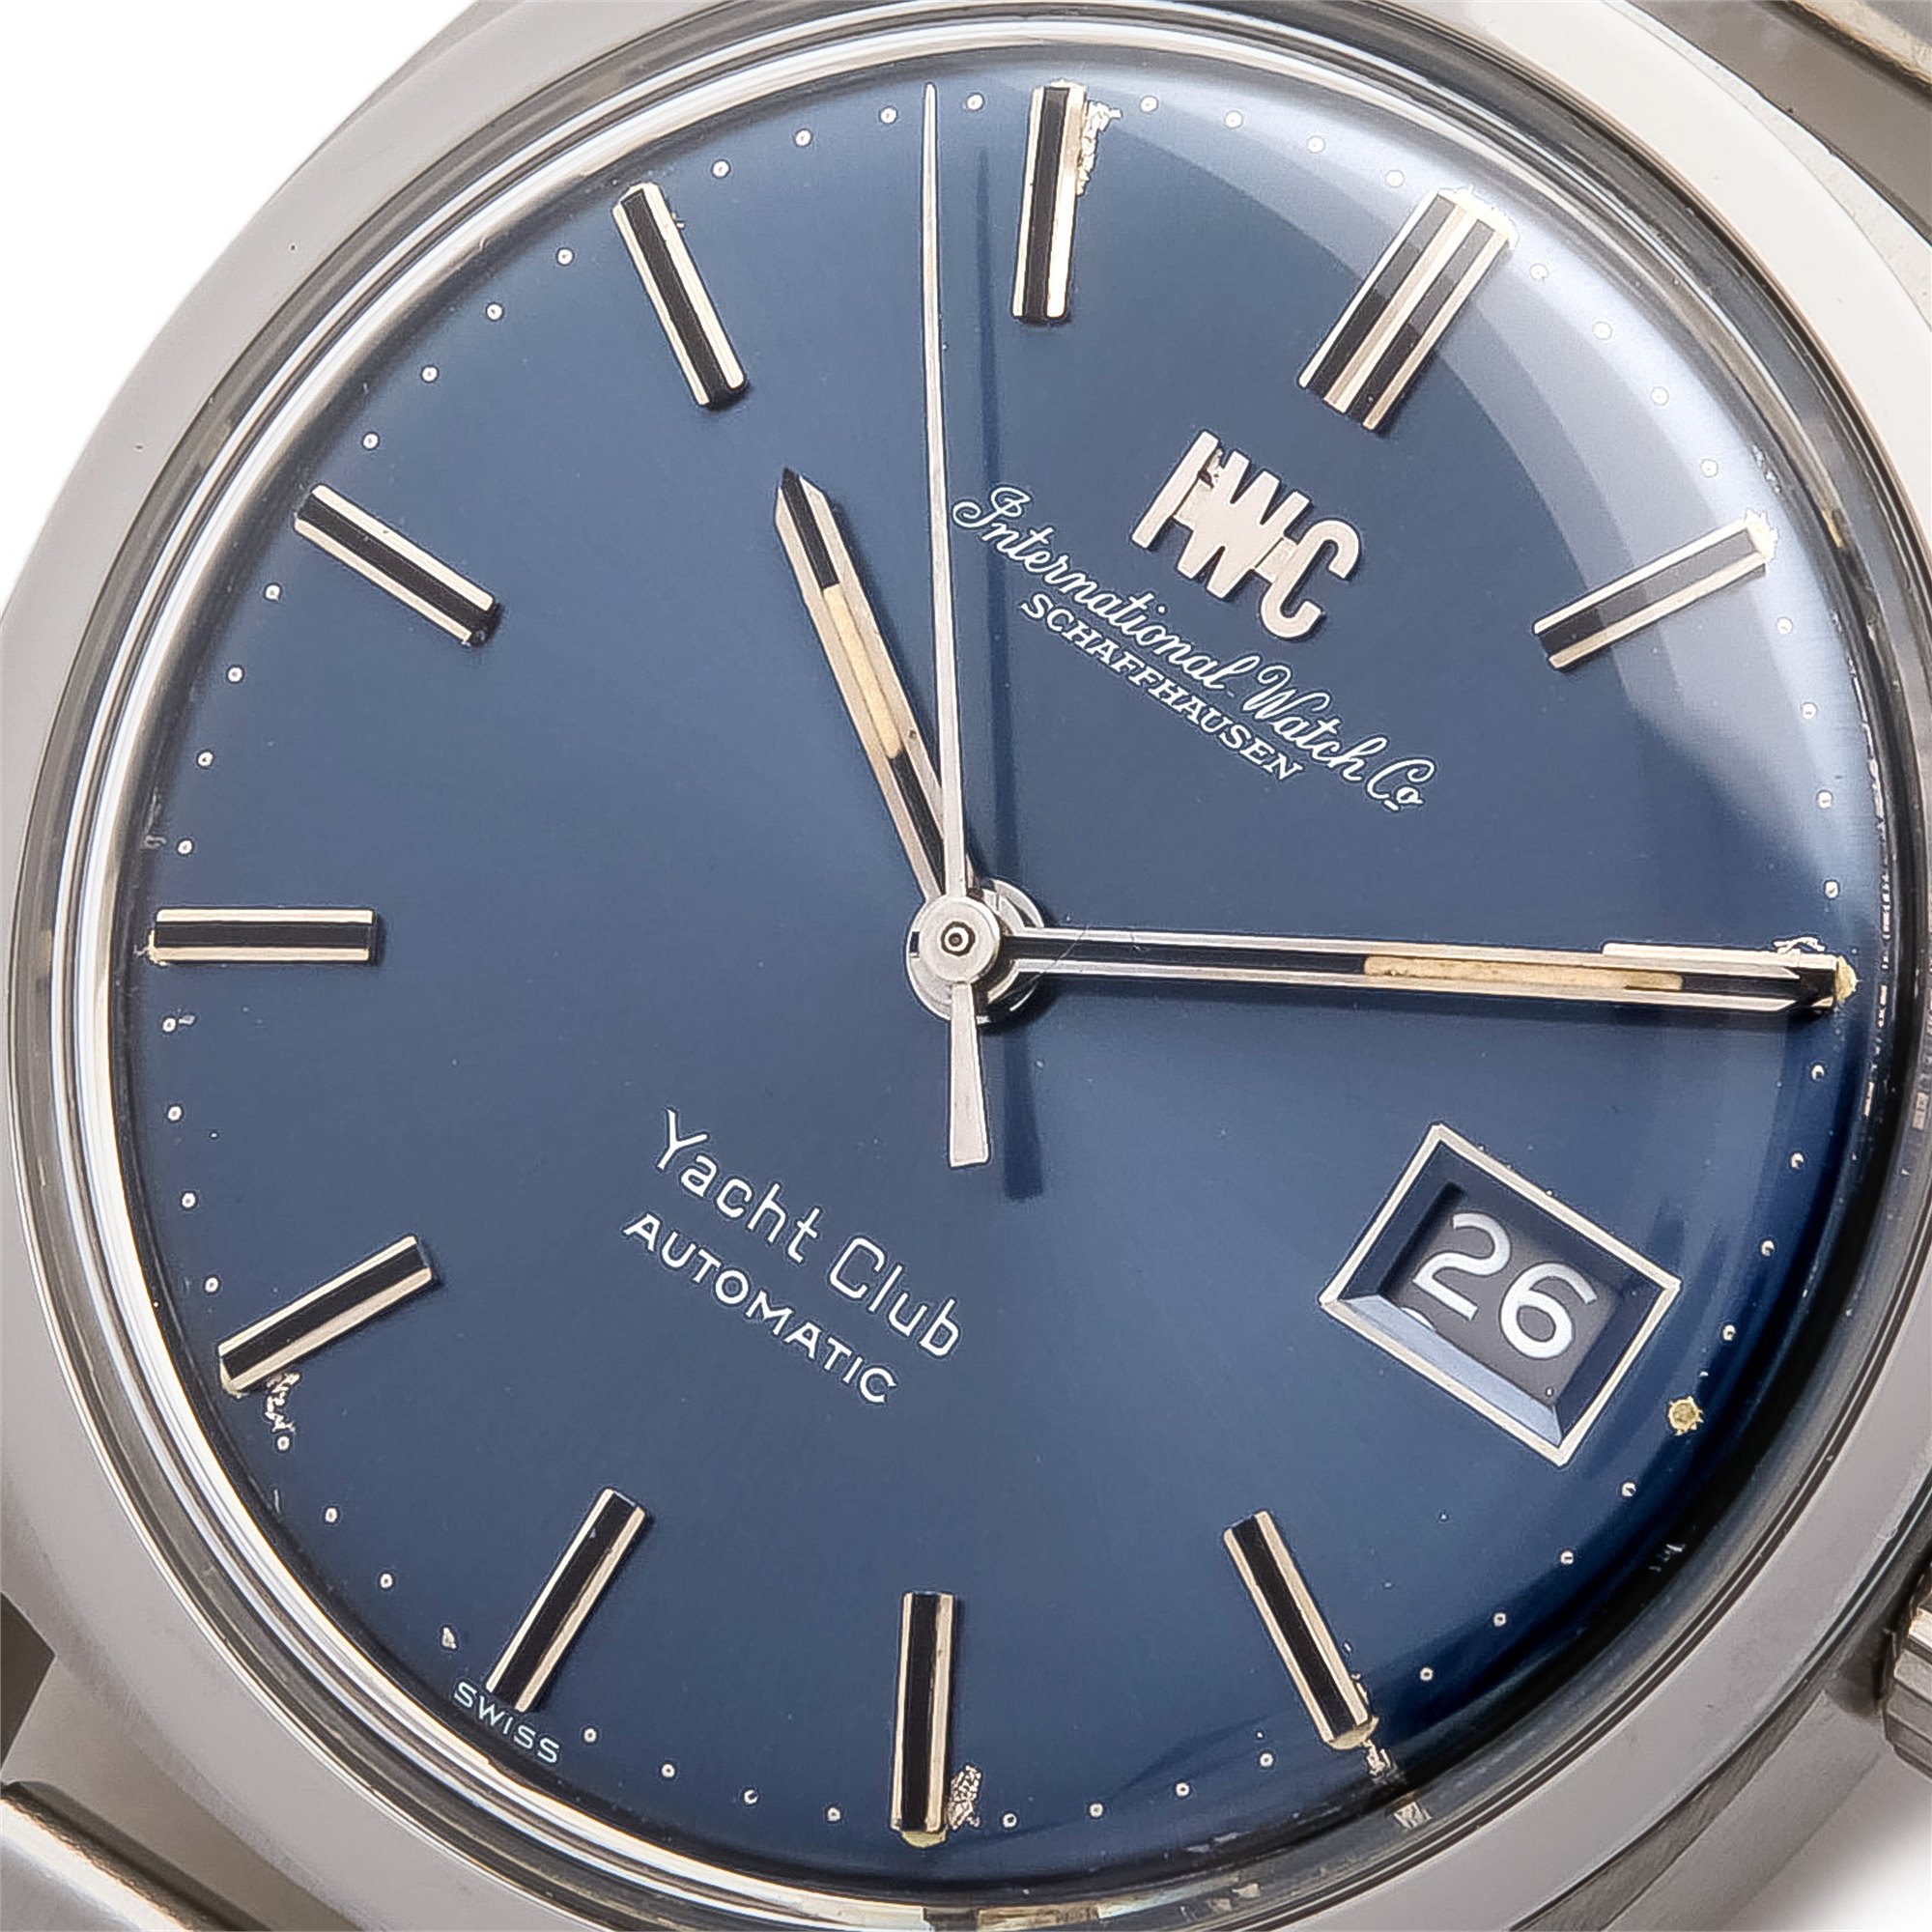 IWC Yacht Club VinLabele Blue Dial Roestvrij Staal R811